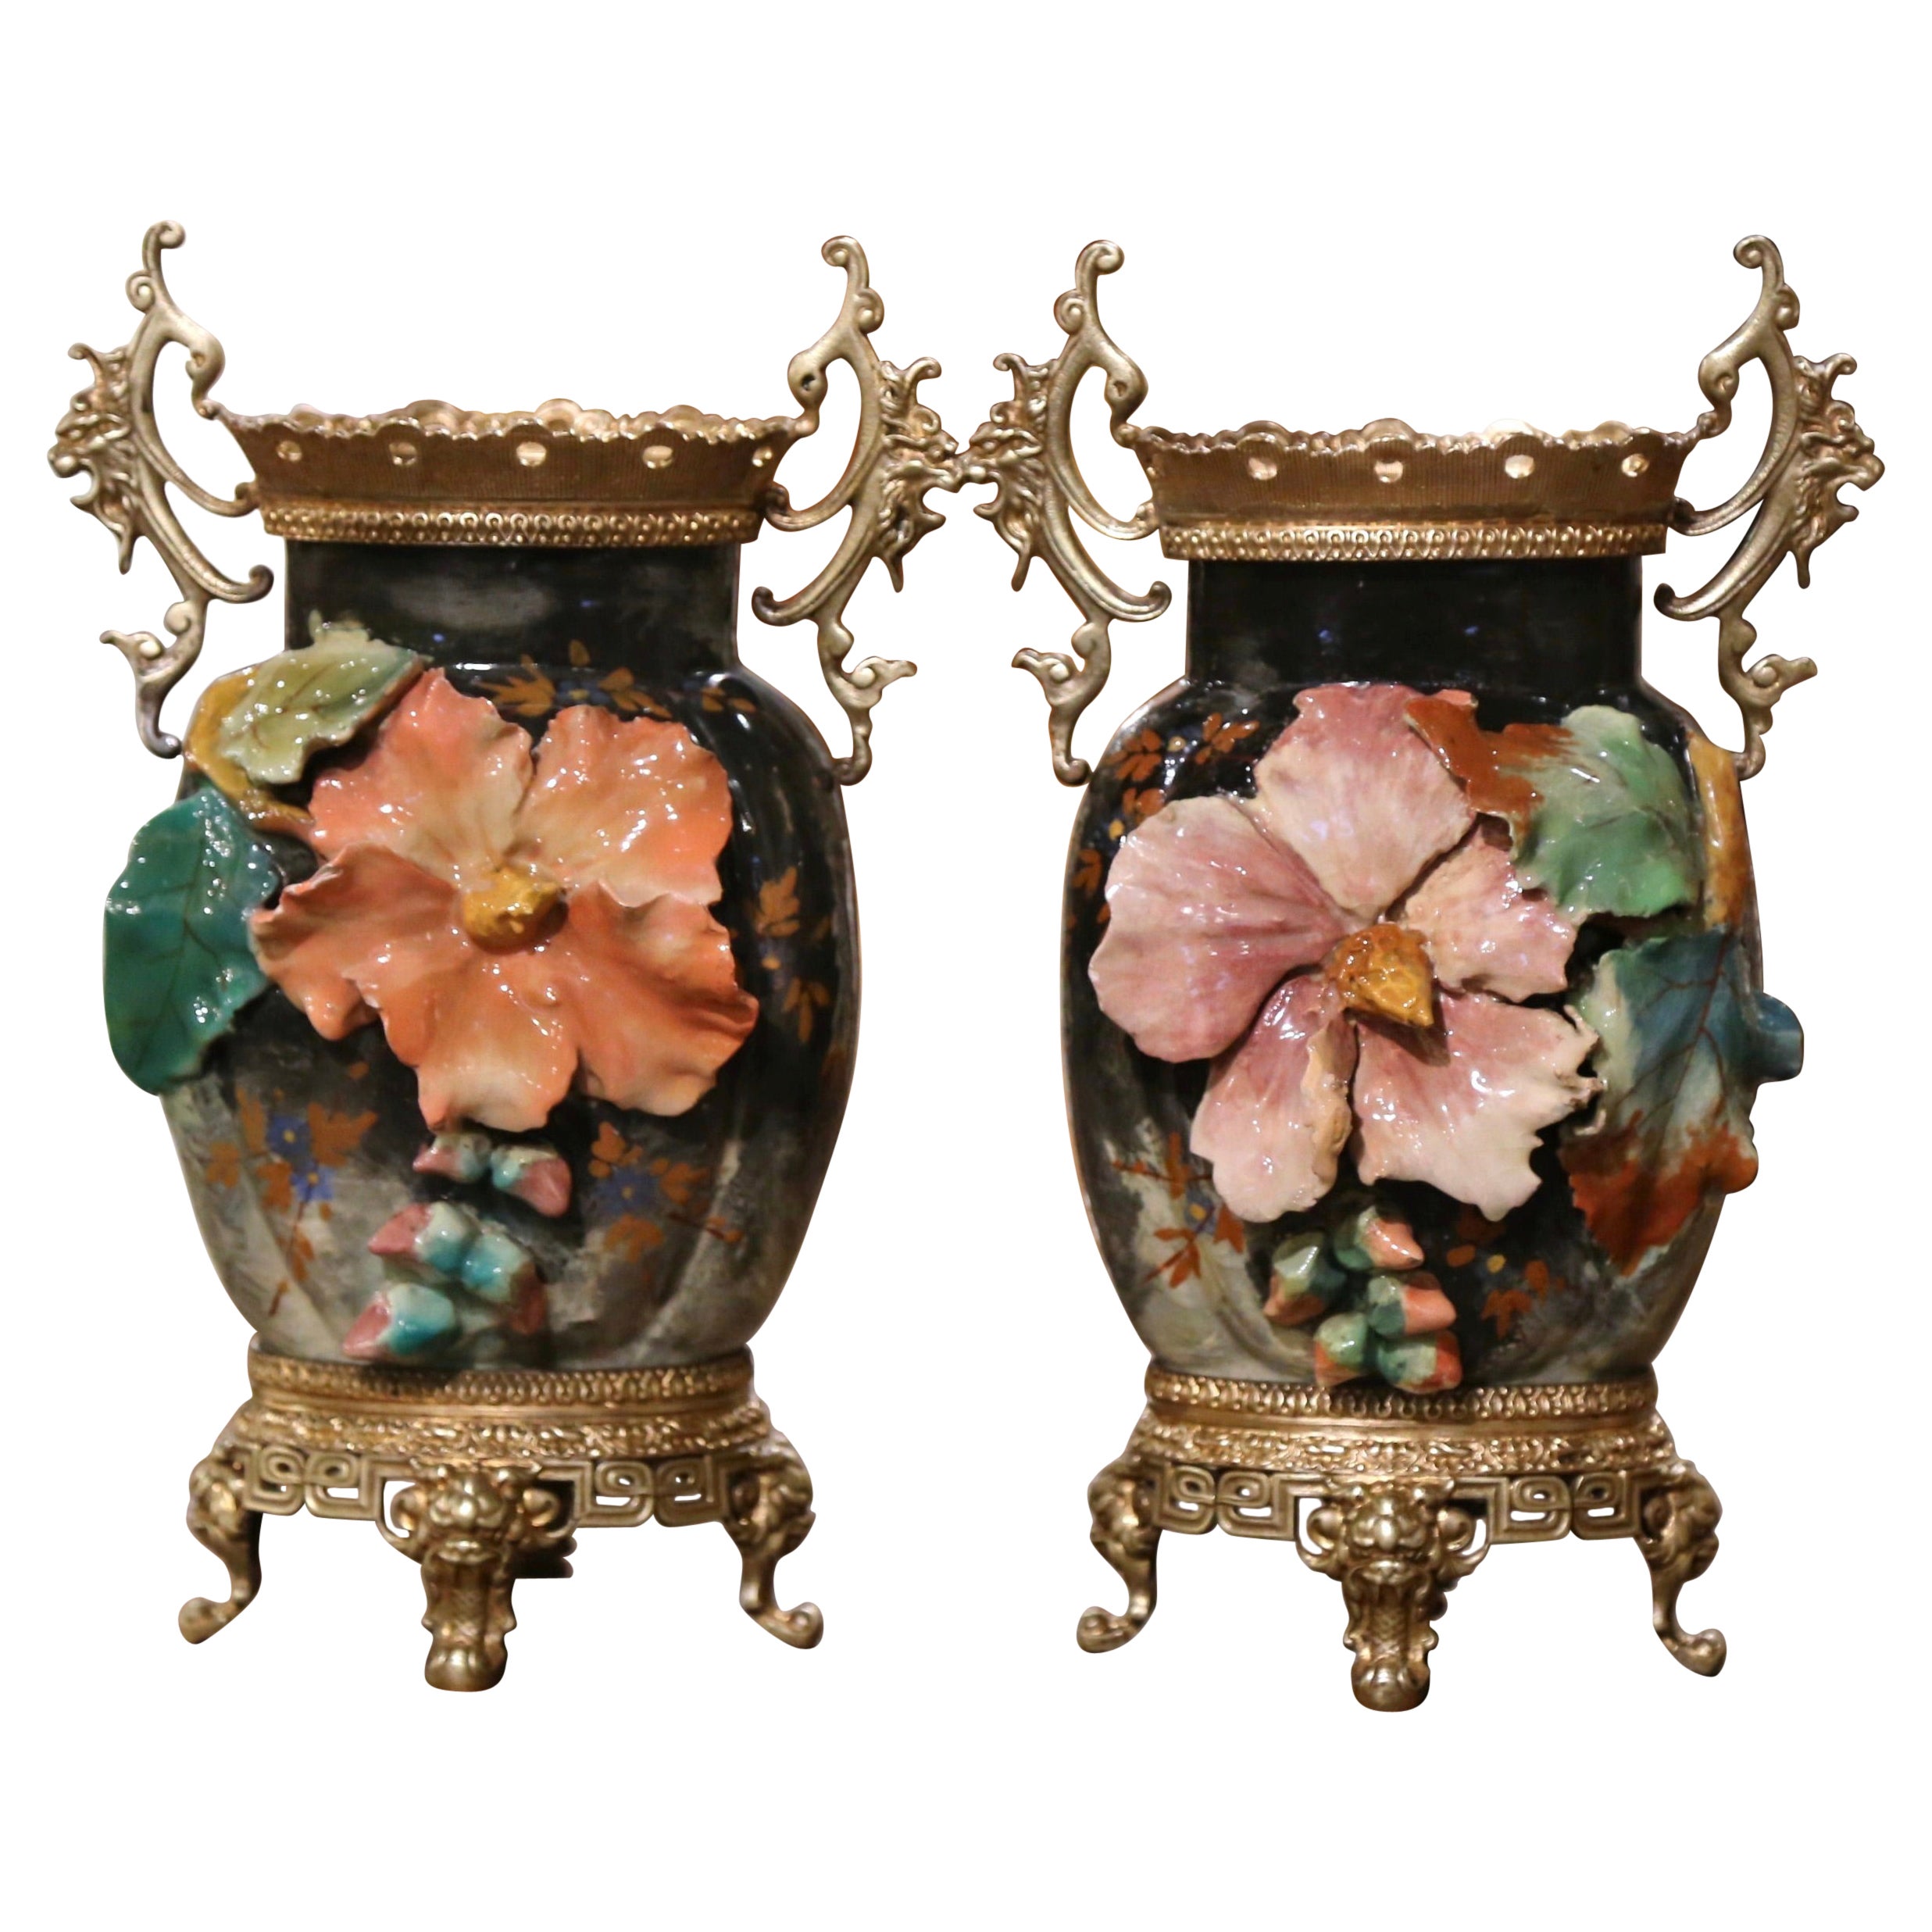 Pair of 19th Century French Barbotine Faience and Brass Vases from Montigny